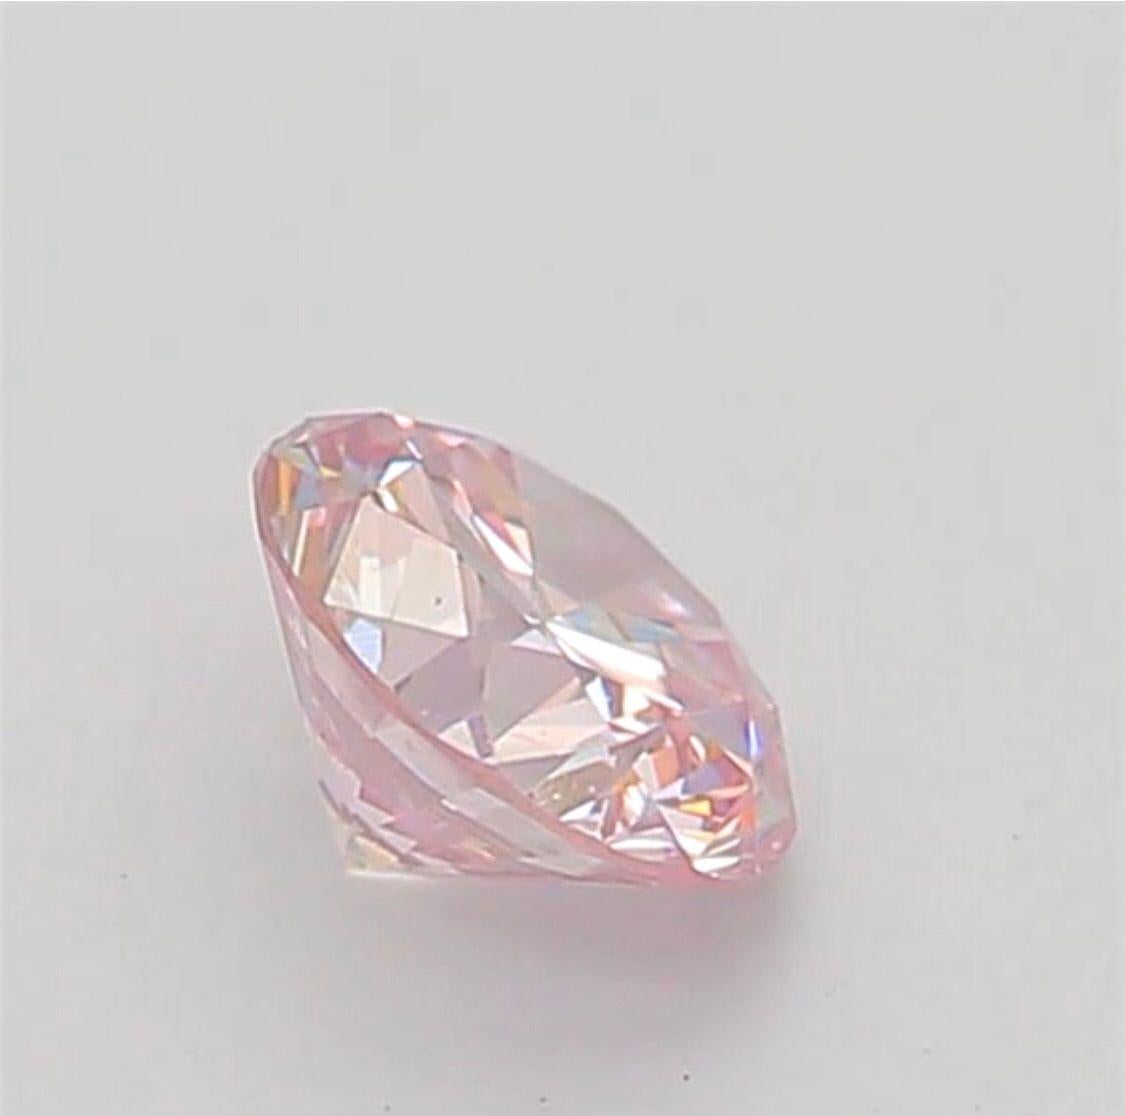 0.20 Carat Very Light Pink Round Shaped Diamond VS1 Clarity CGL Certified For Sale 1